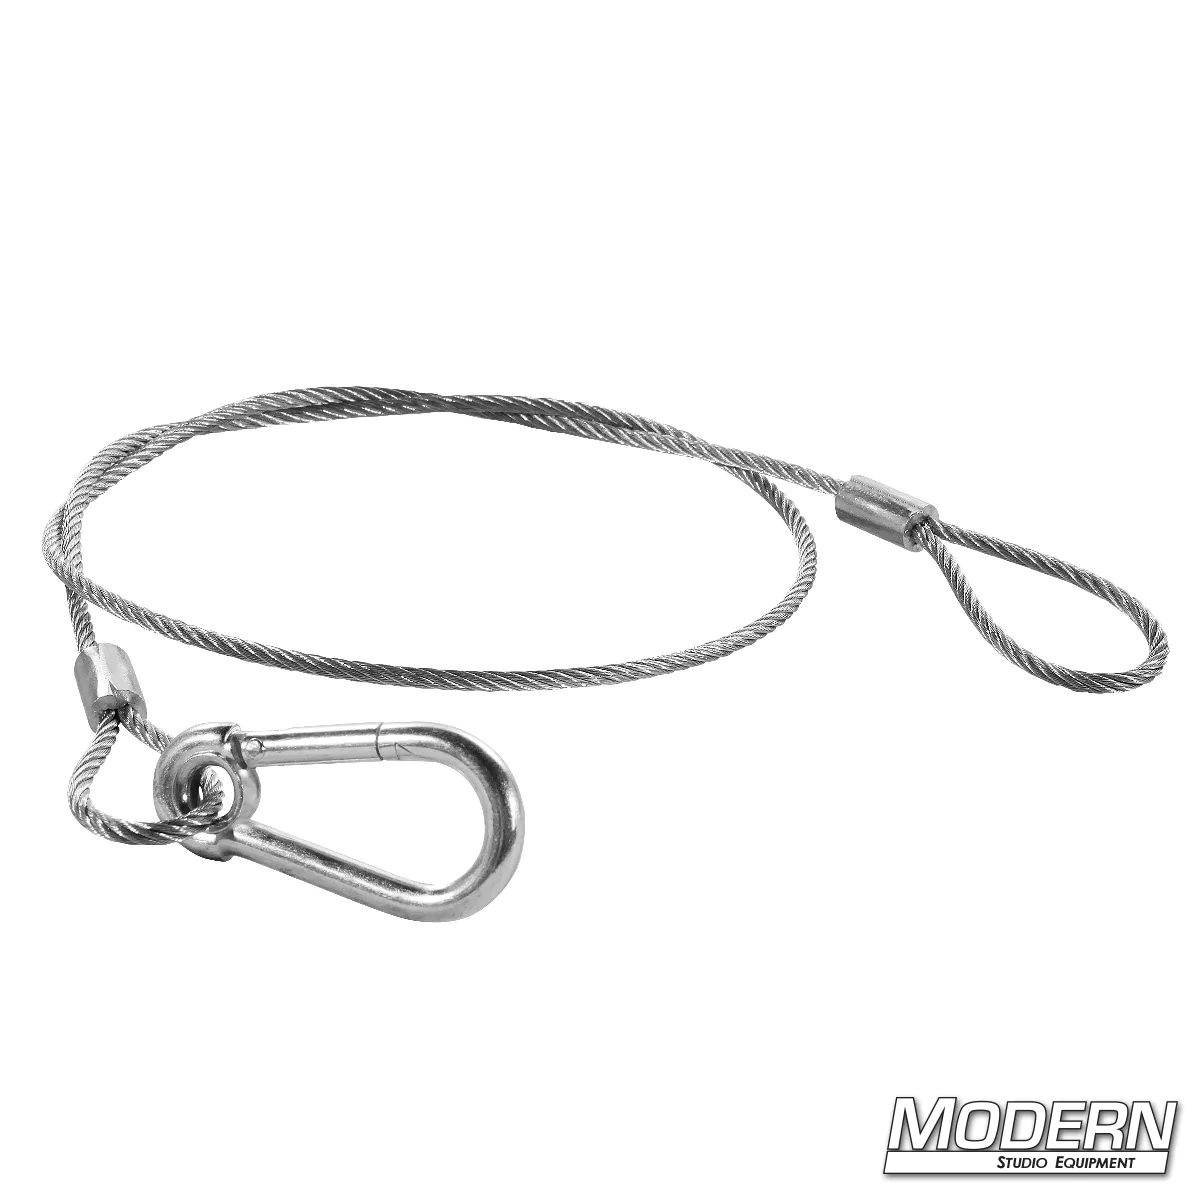 2' Safety Cable - Stainless Steel